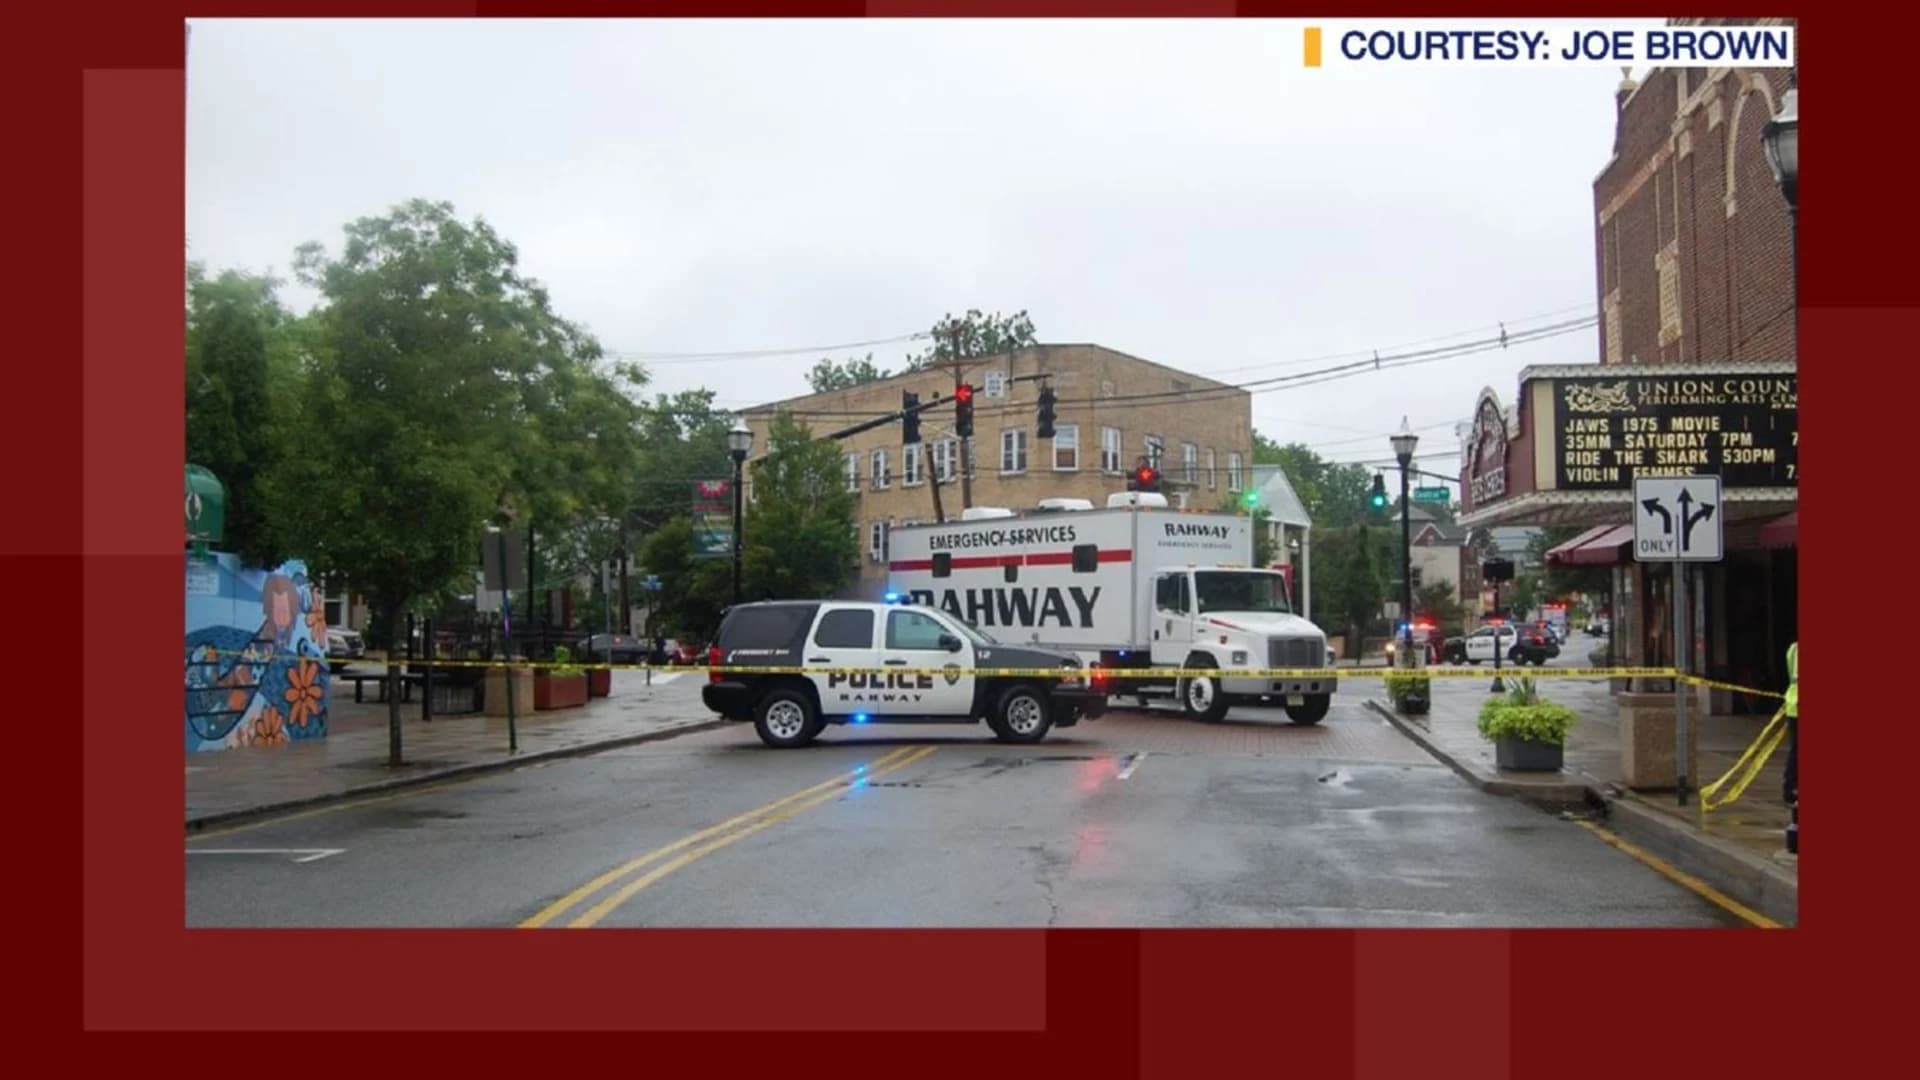 Police activity prompts evacuations in Rahway